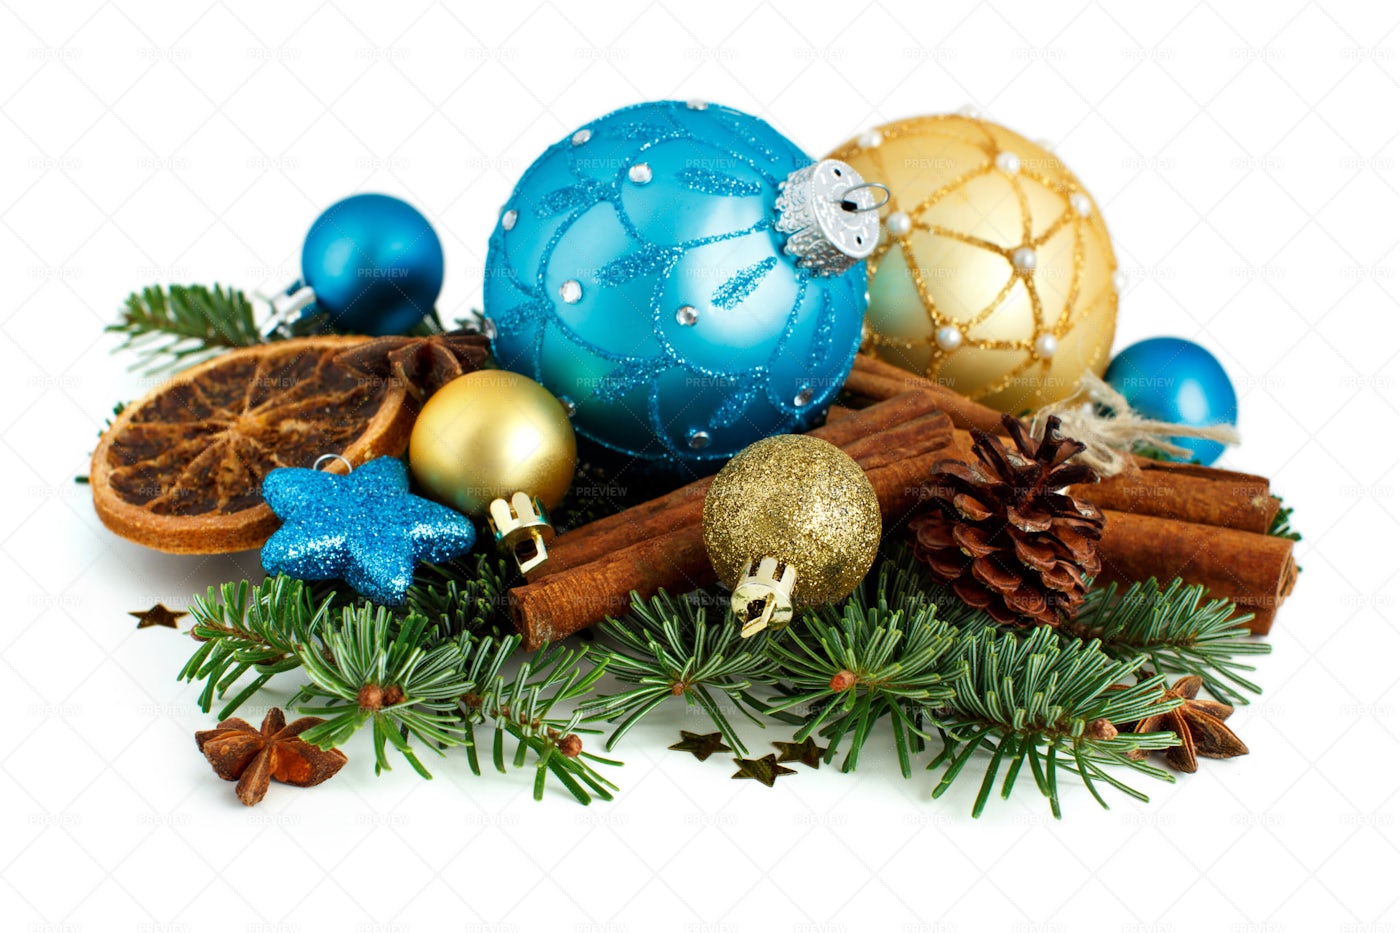 Turquoise And Golden Christmas Ornaments: Stock Photos